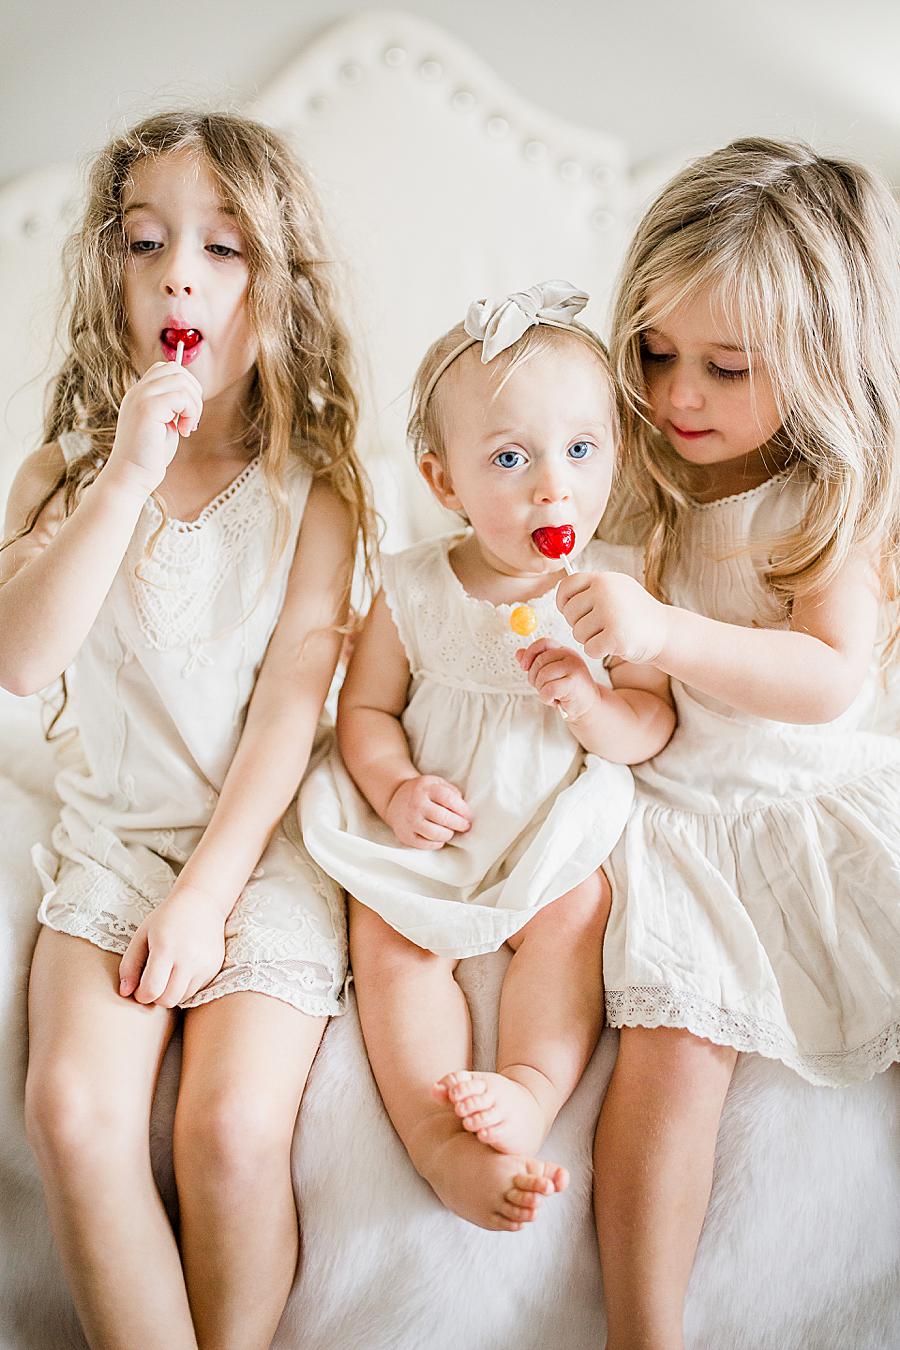 Red lollipop by Knoxville Wedding Photographer, Amanda May Photos.